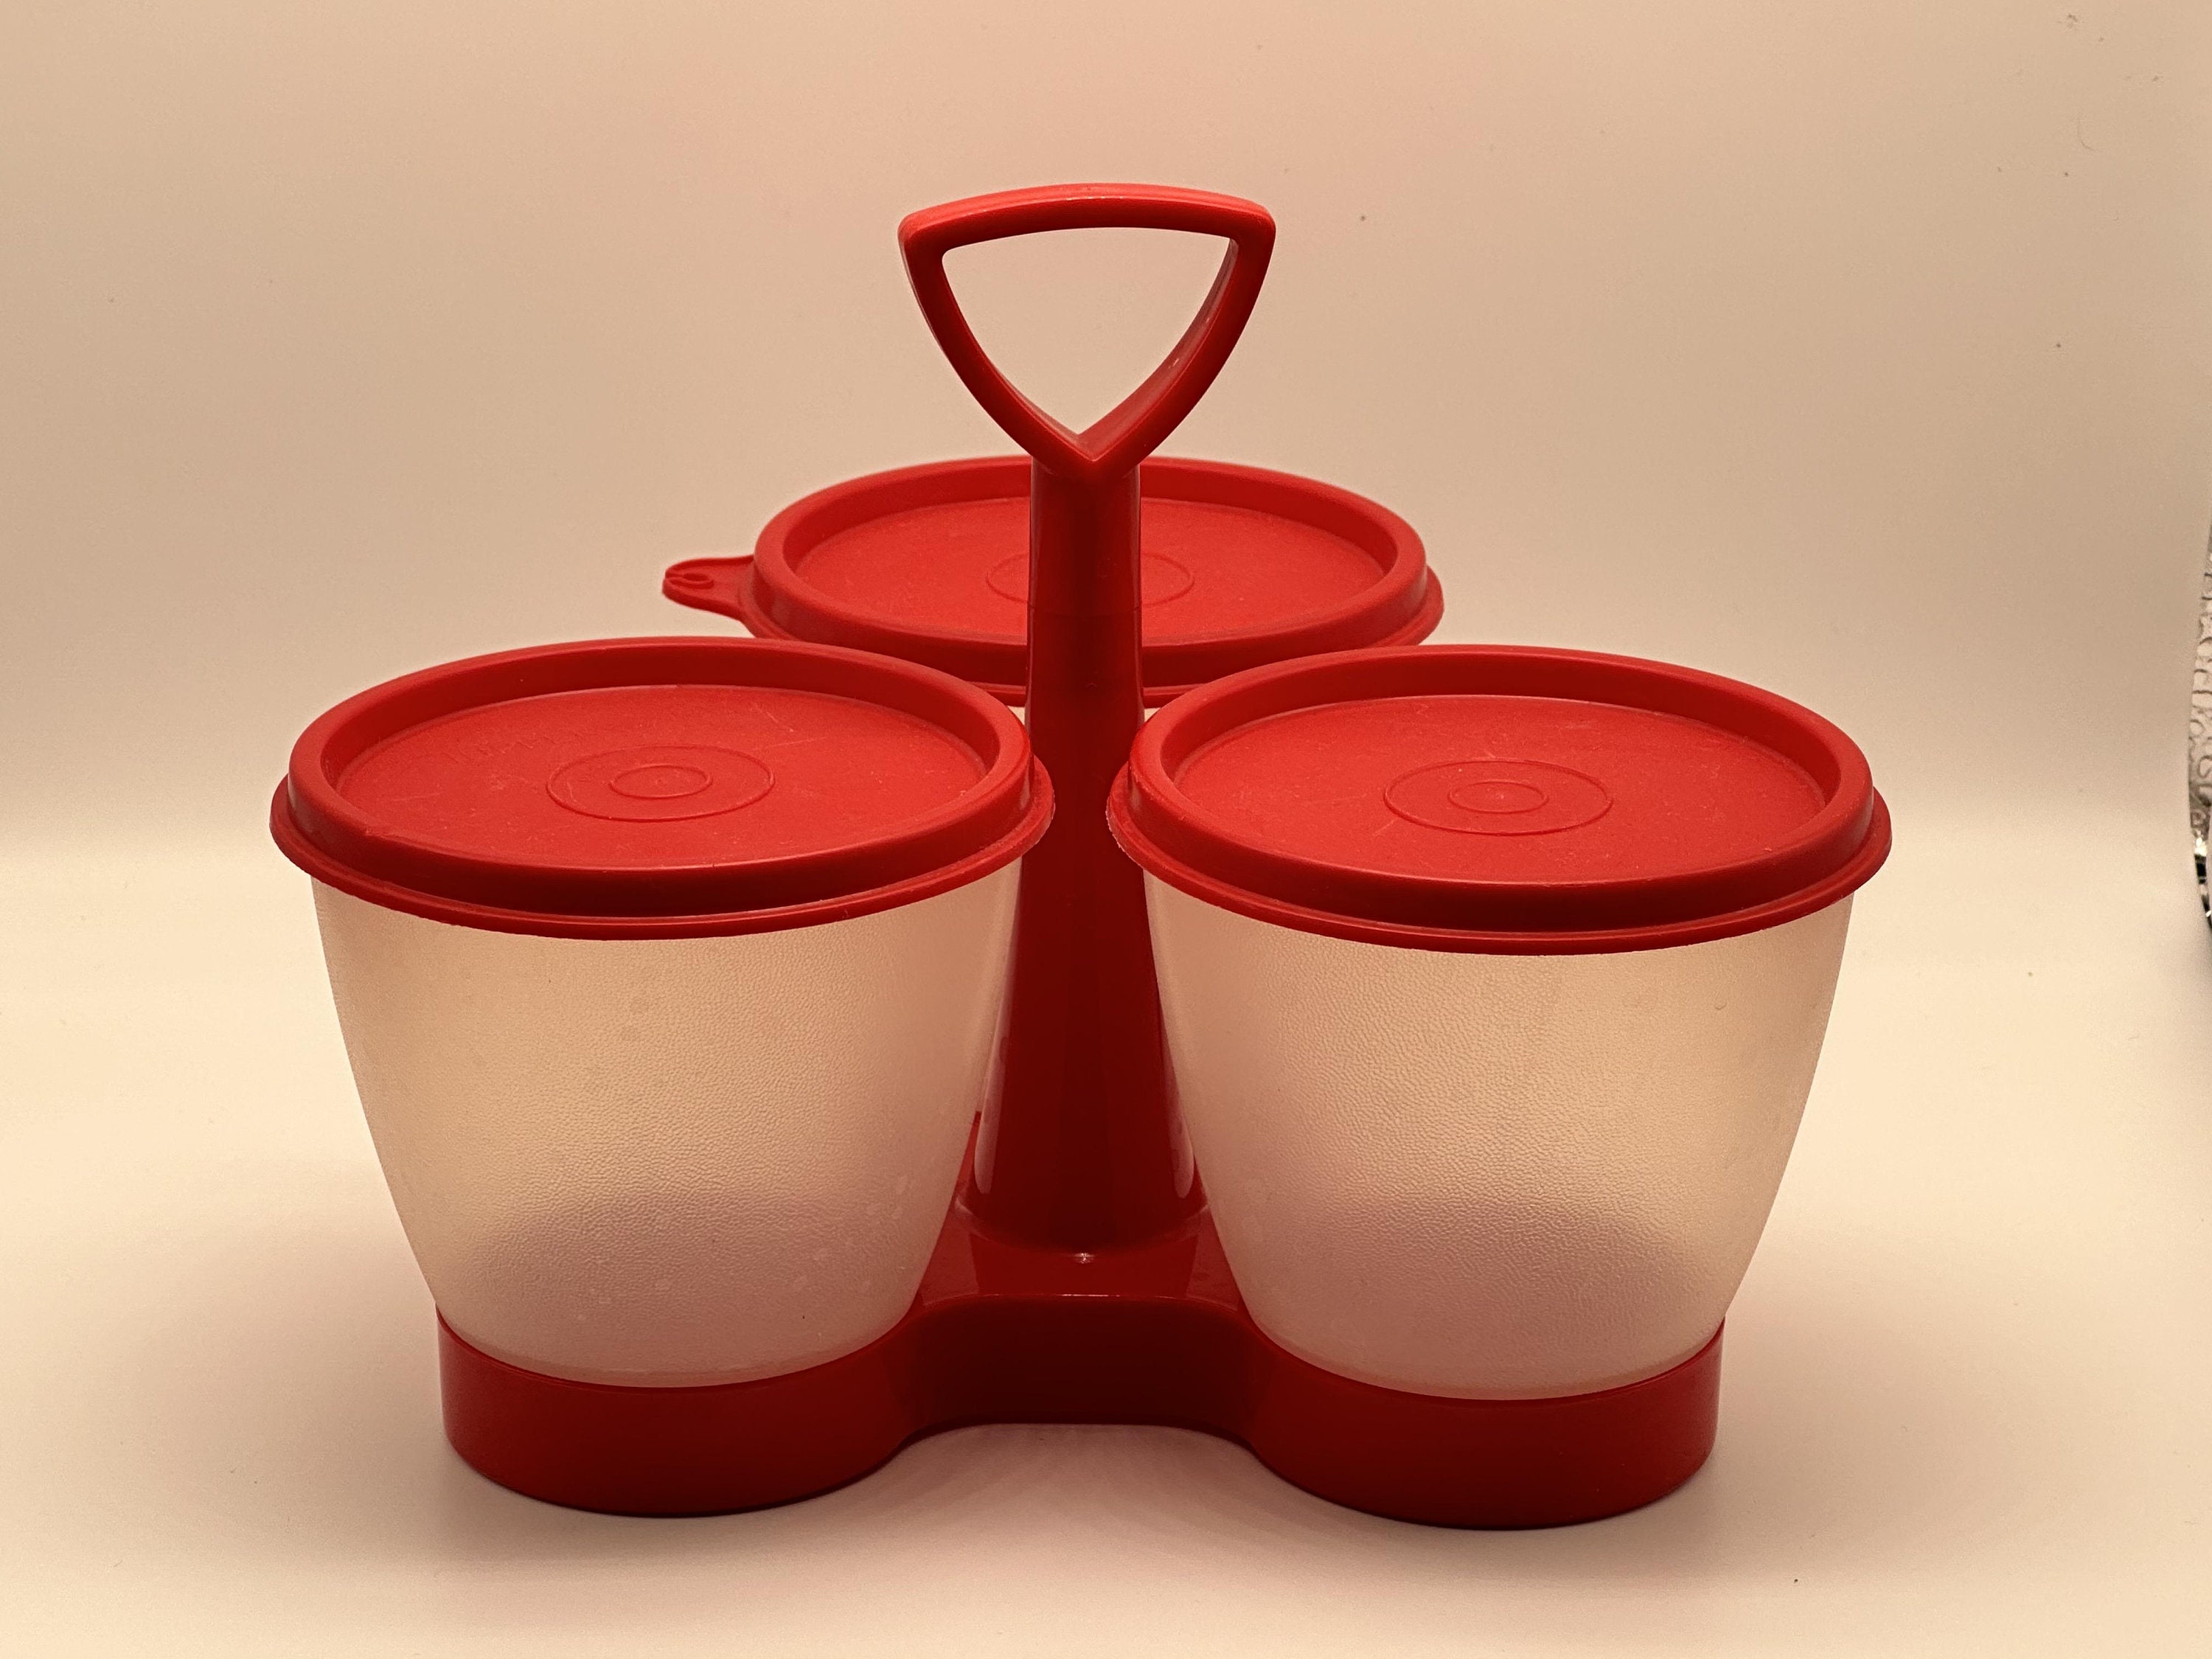 Vintage Tupperware Canister Set Red Tulip Rare for Sale in Chatham